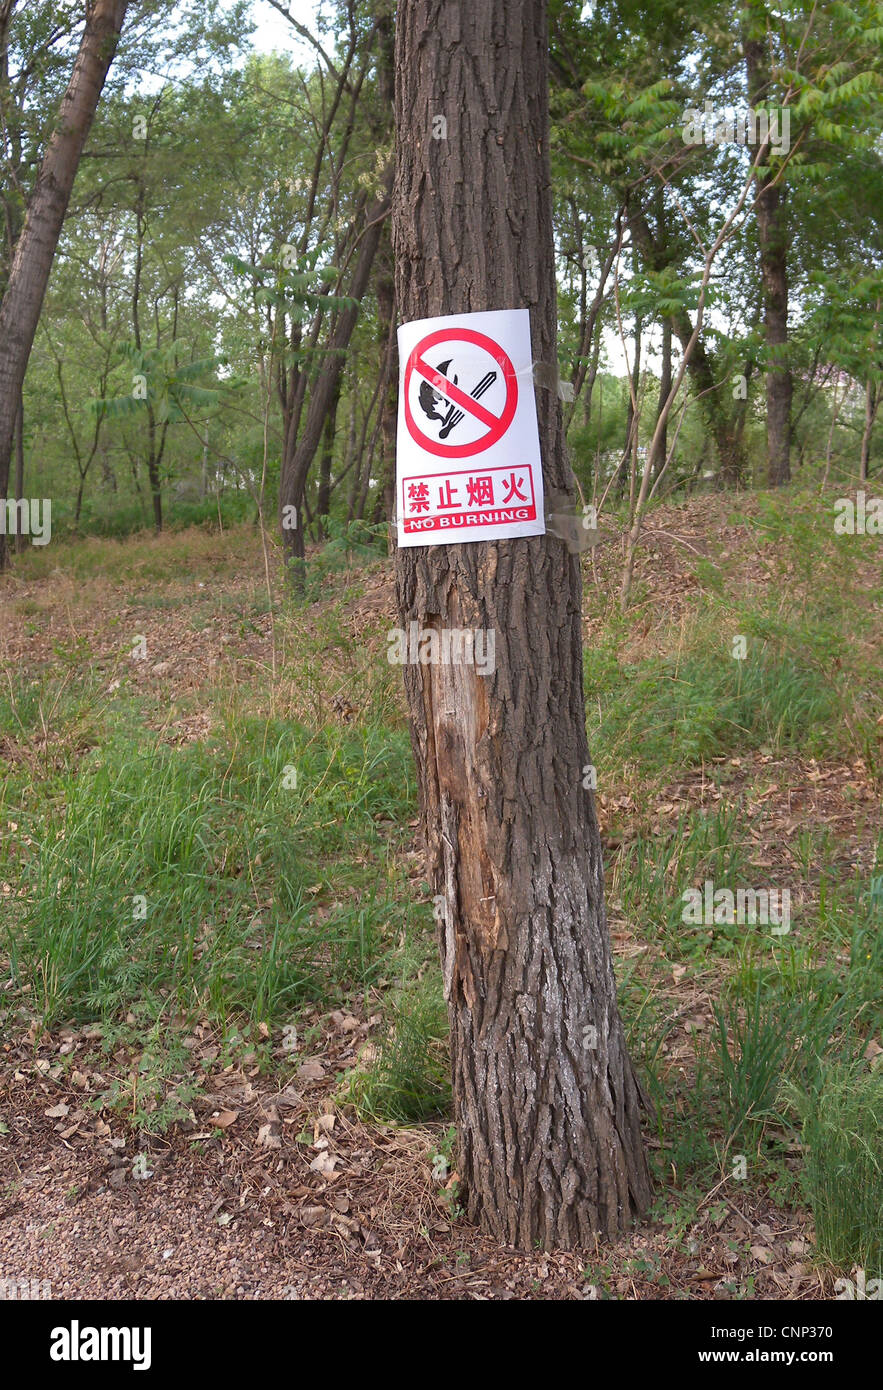 Sign warning of fire danger, on tree trunk in forest, Zushan Forest Park, Qinhuangdao, China, may Stock Photo